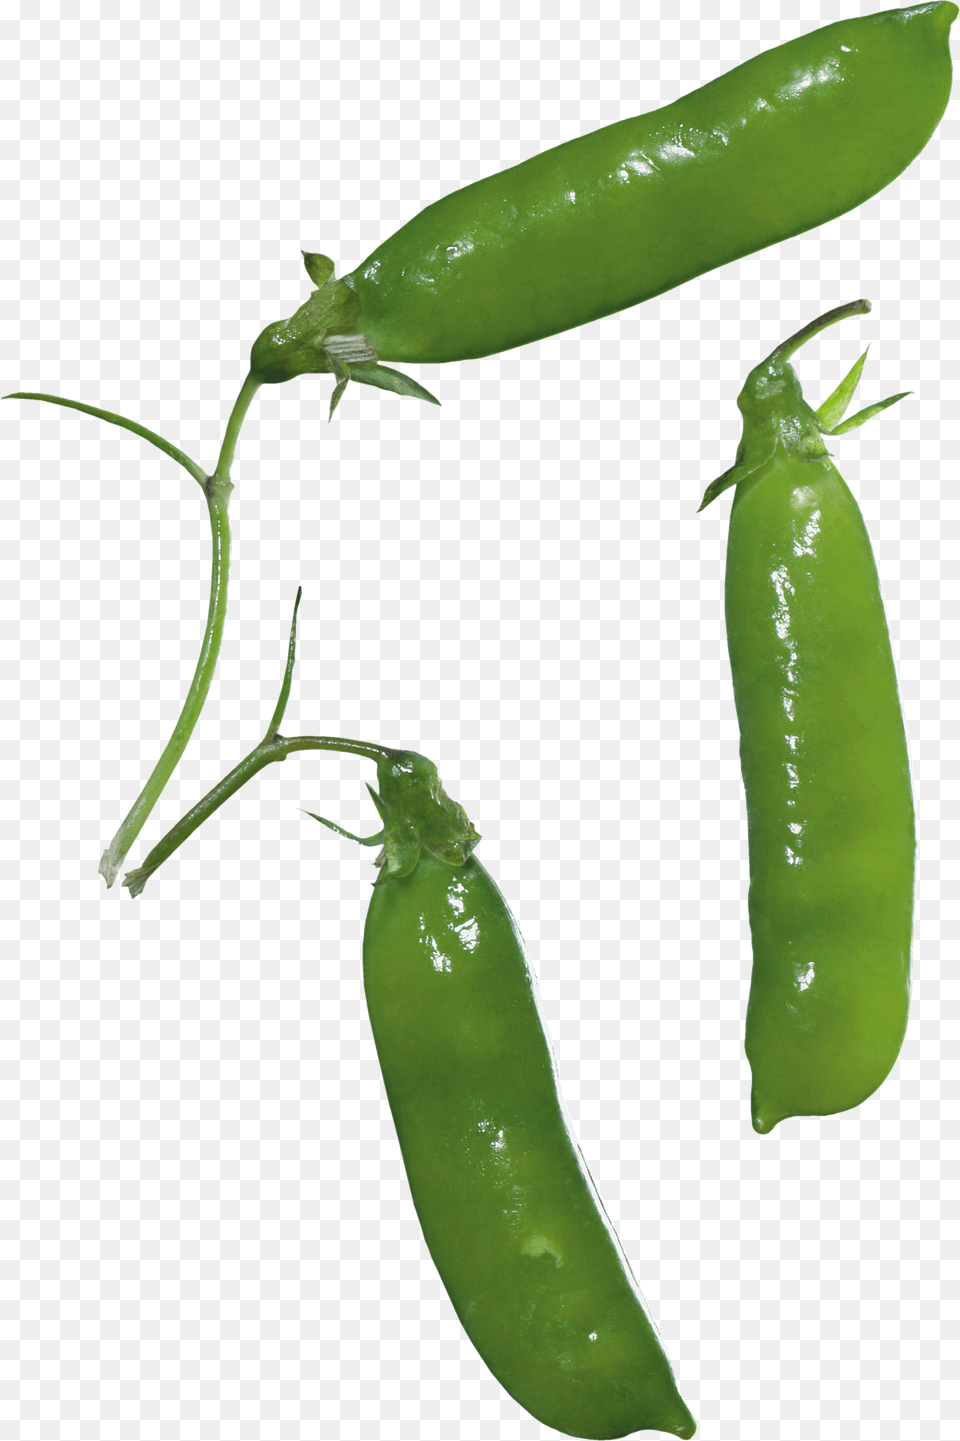 Pea, Food, Plant, Produce, Vegetable Png Image